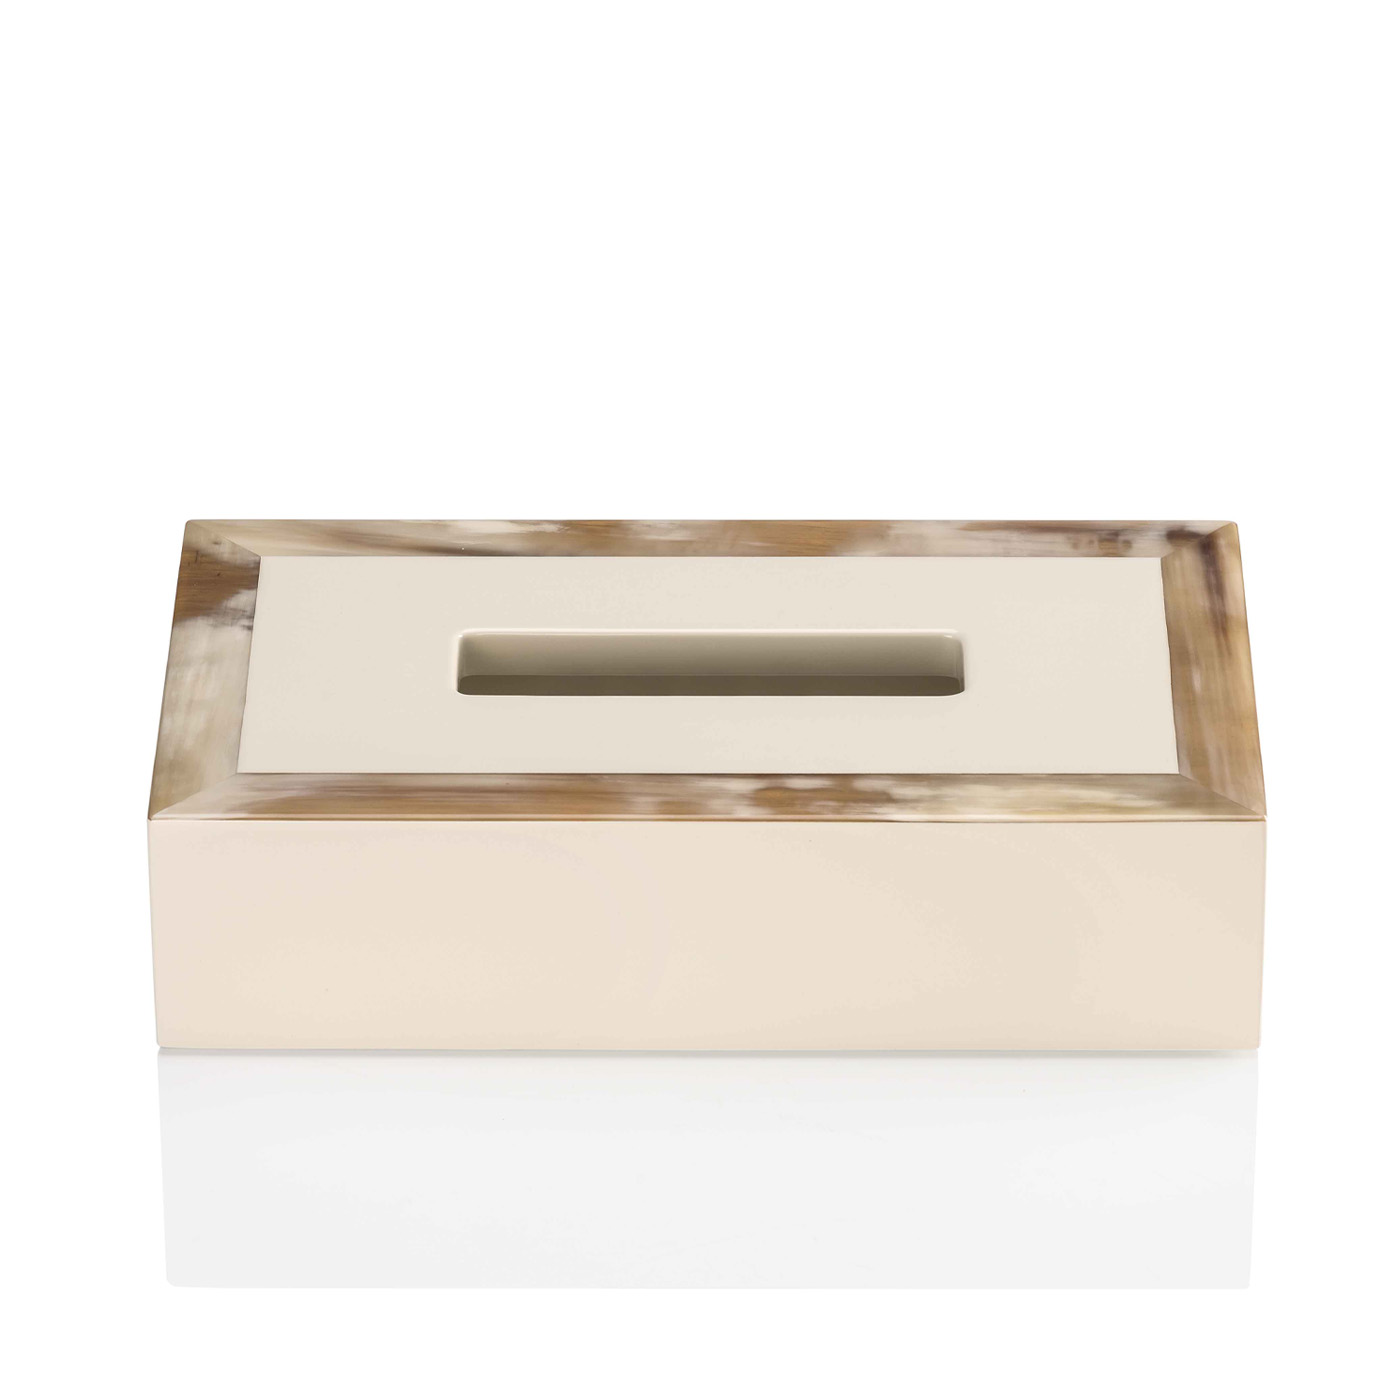 Bath sets - Geremia tissue box holder in horn and glossy ivory lacquered wood 5318c - Arcahorn